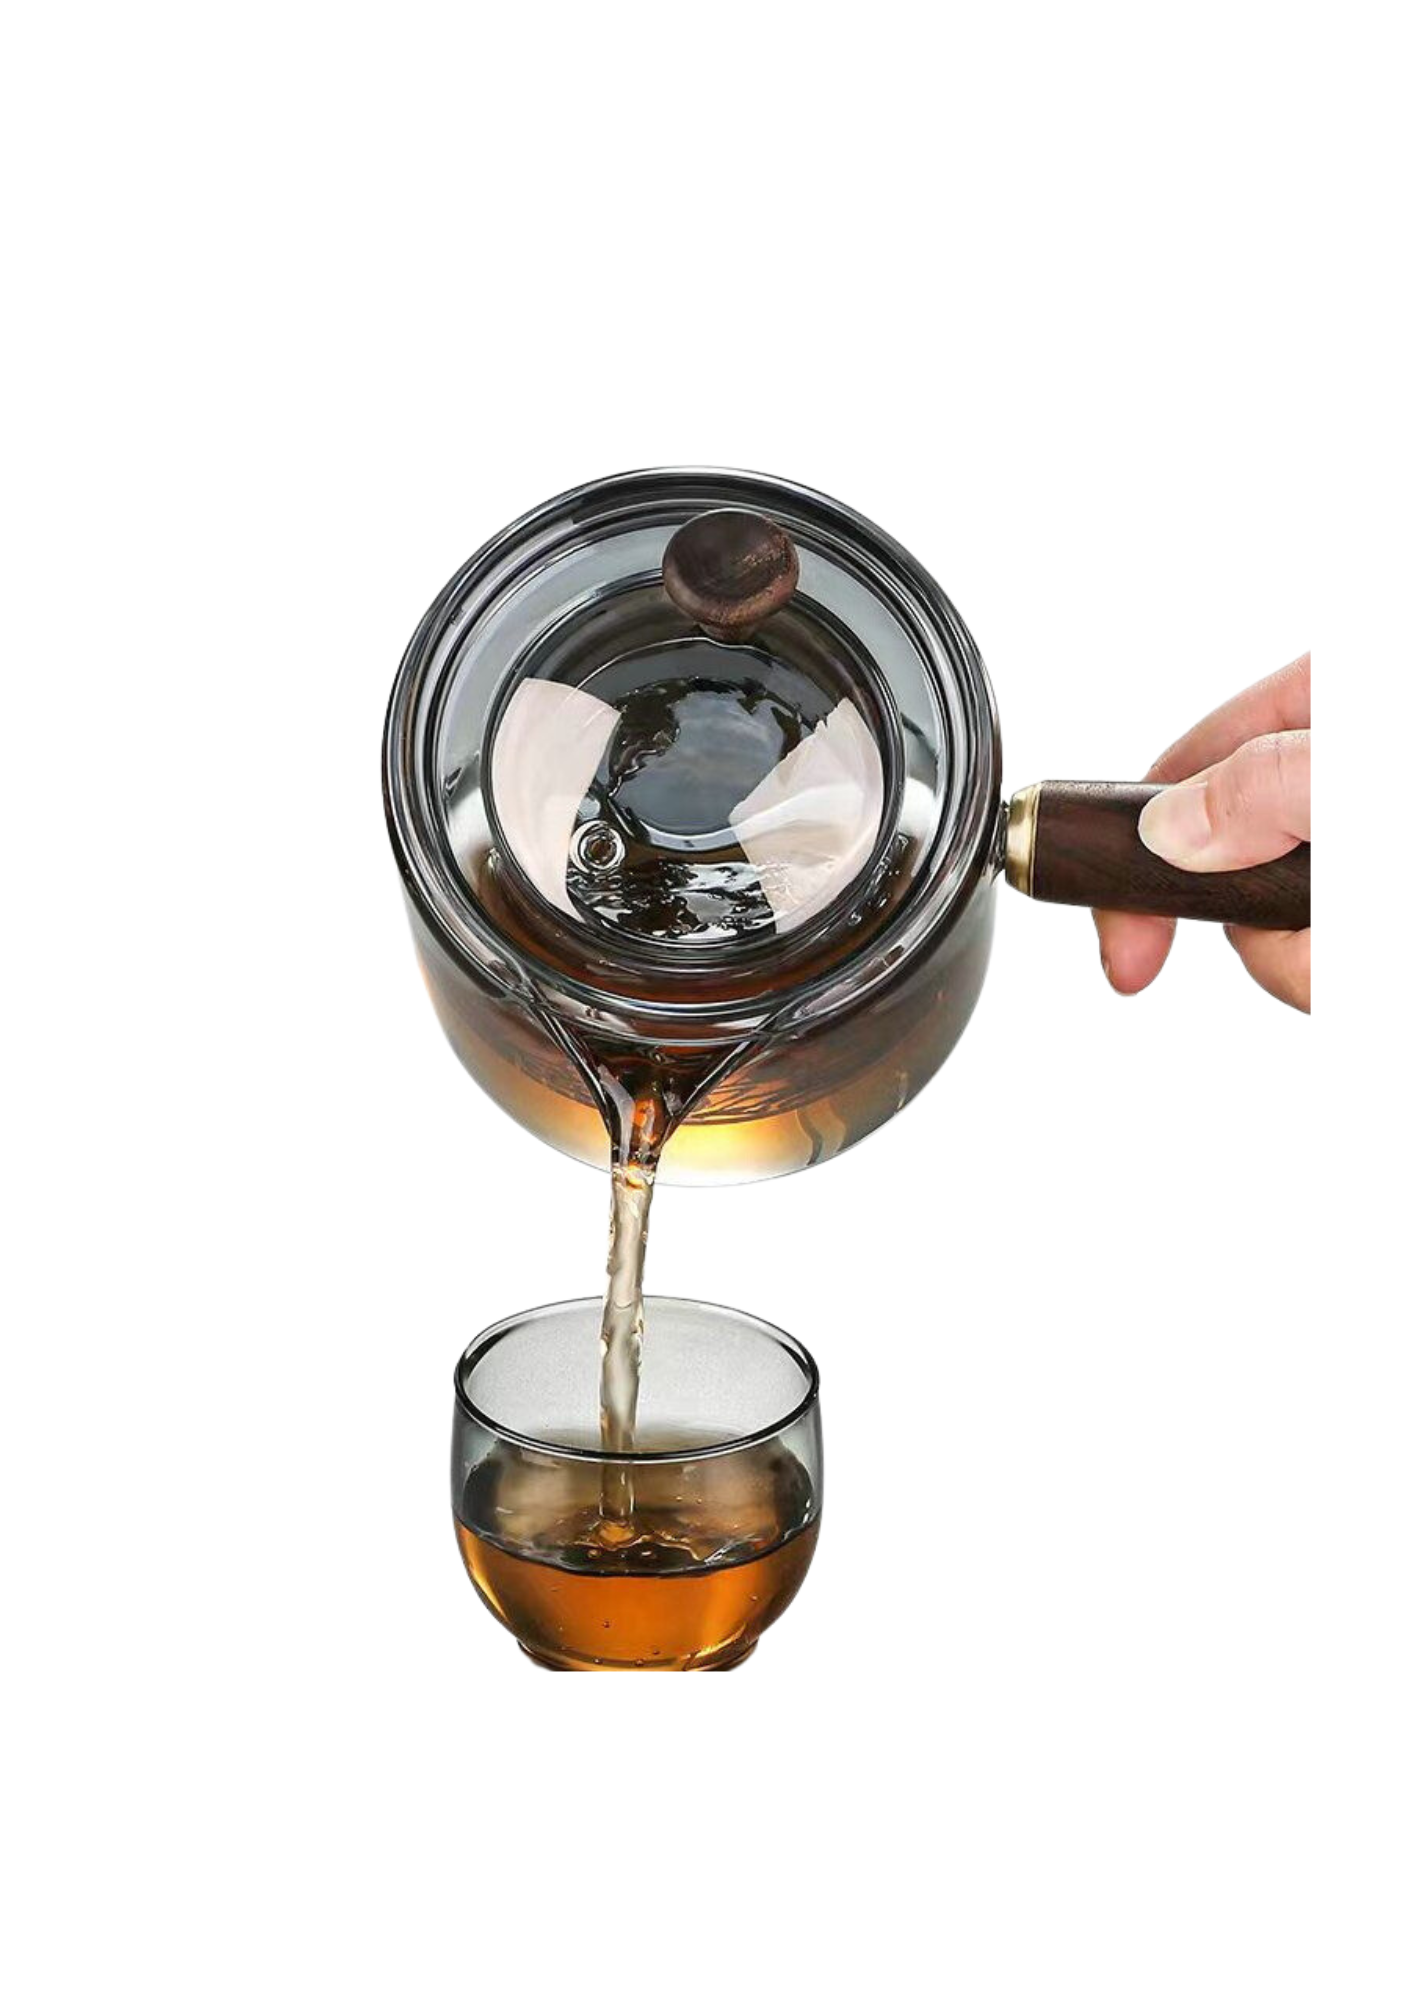 Glass Tea Pot with Wooden Handle